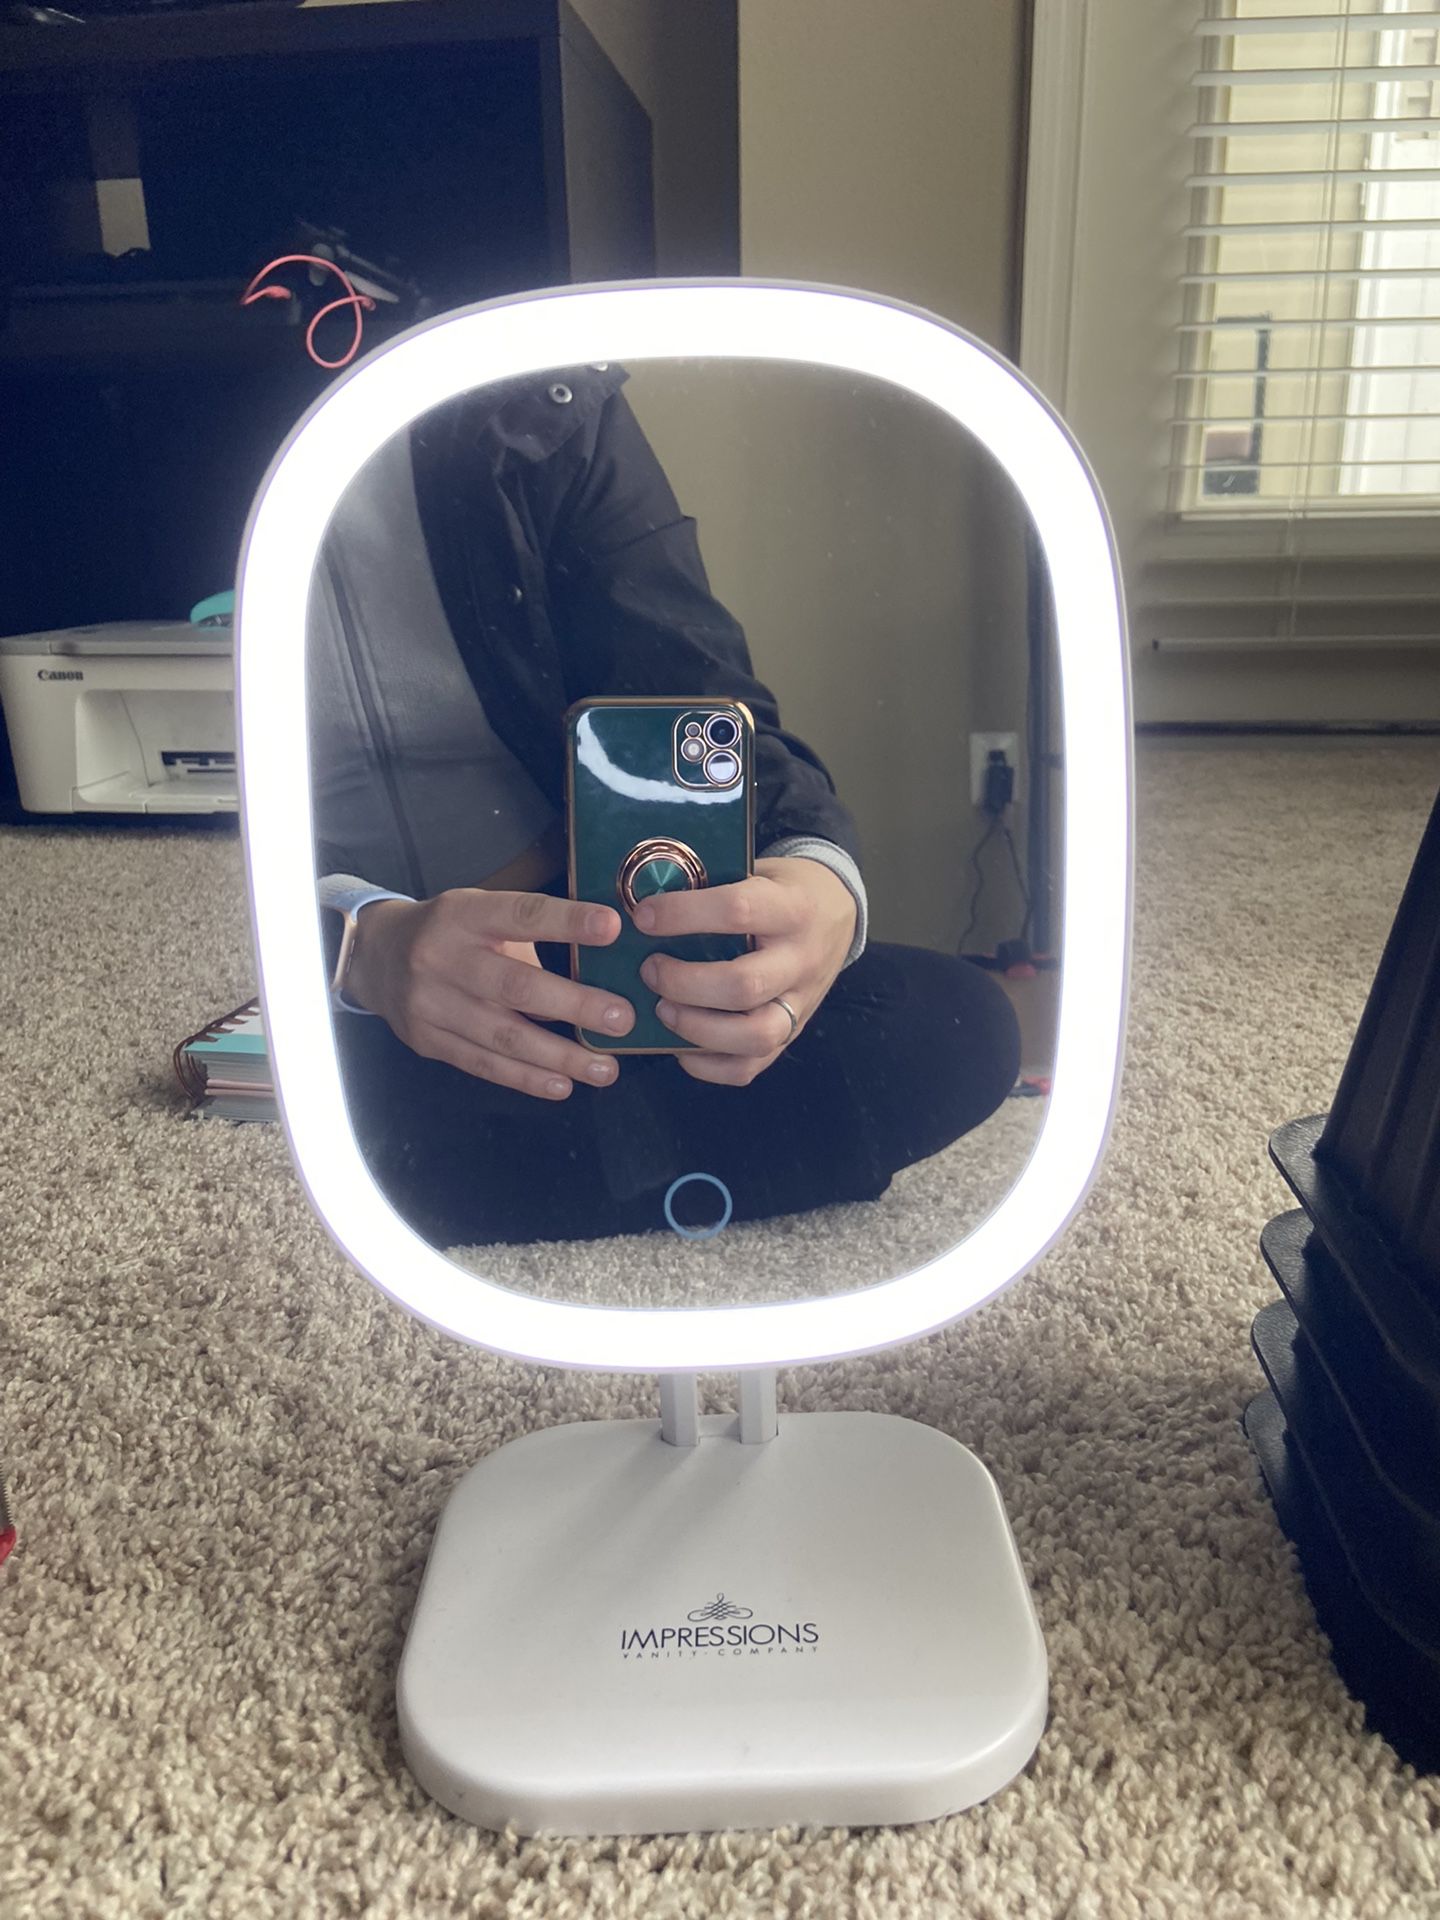 Like New Impressions Vanity Company Touch Highlight Led Makeup Mirror